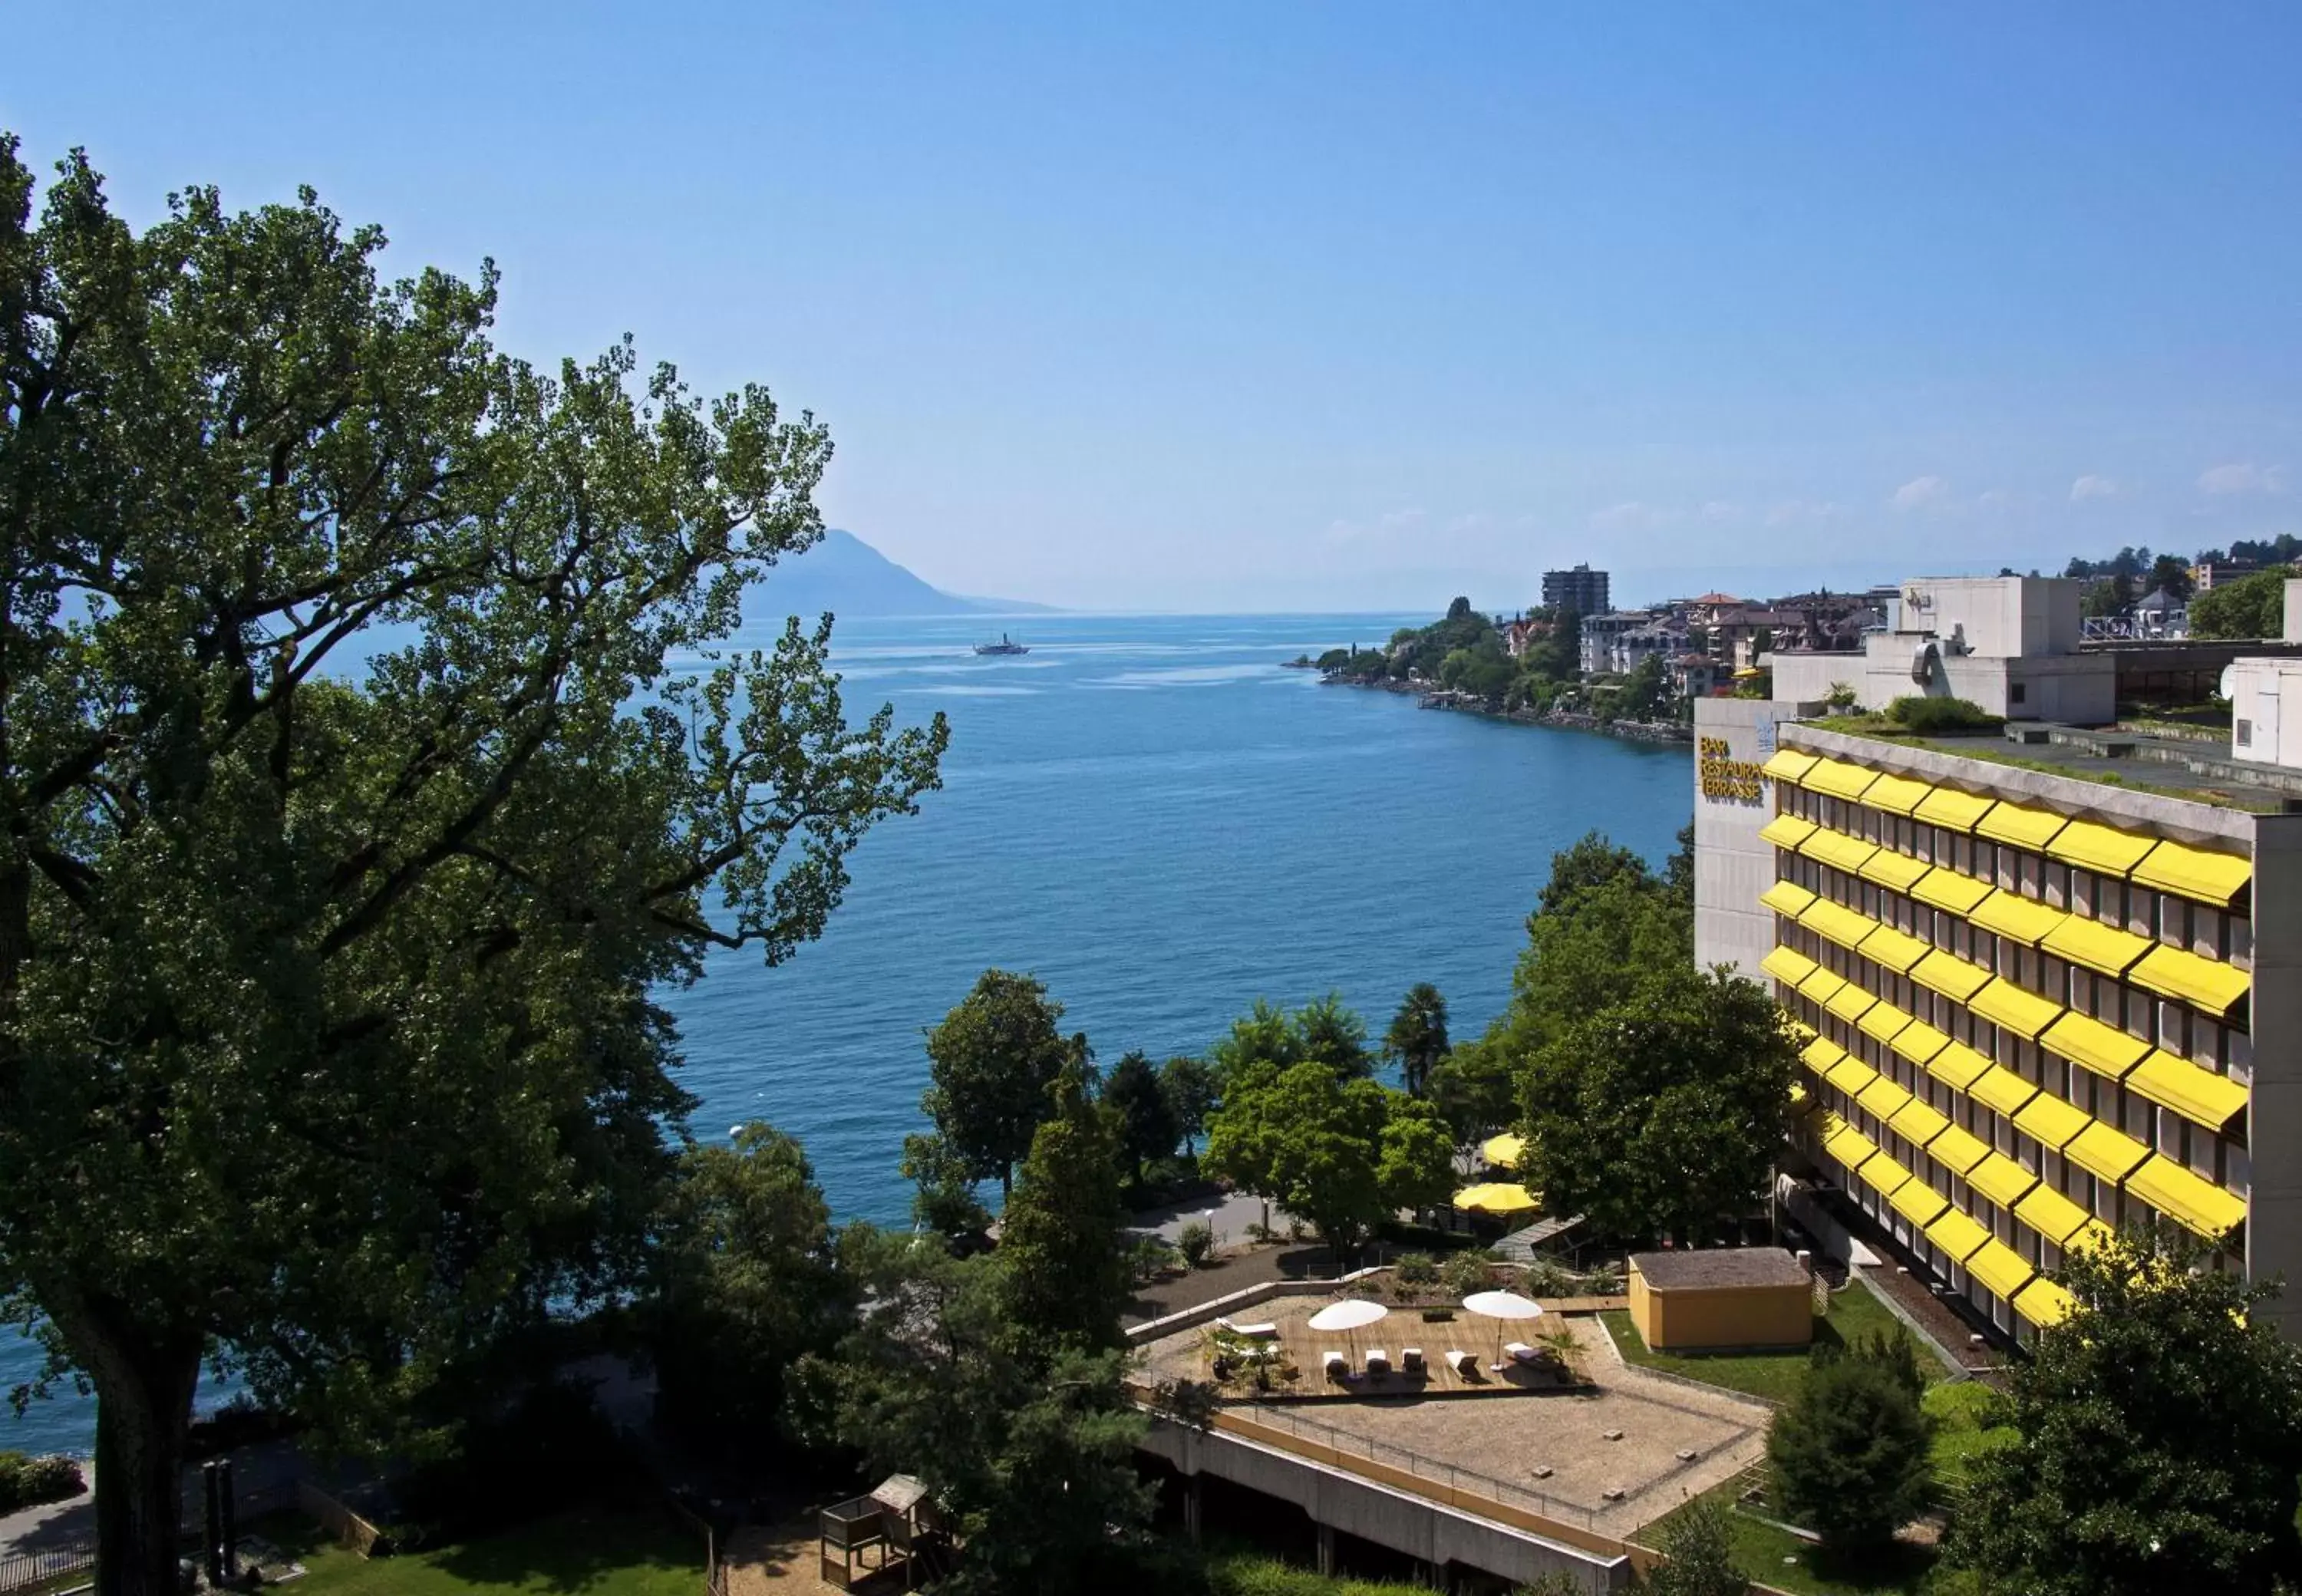 Bird's eye view in Royal Plaza Montreux